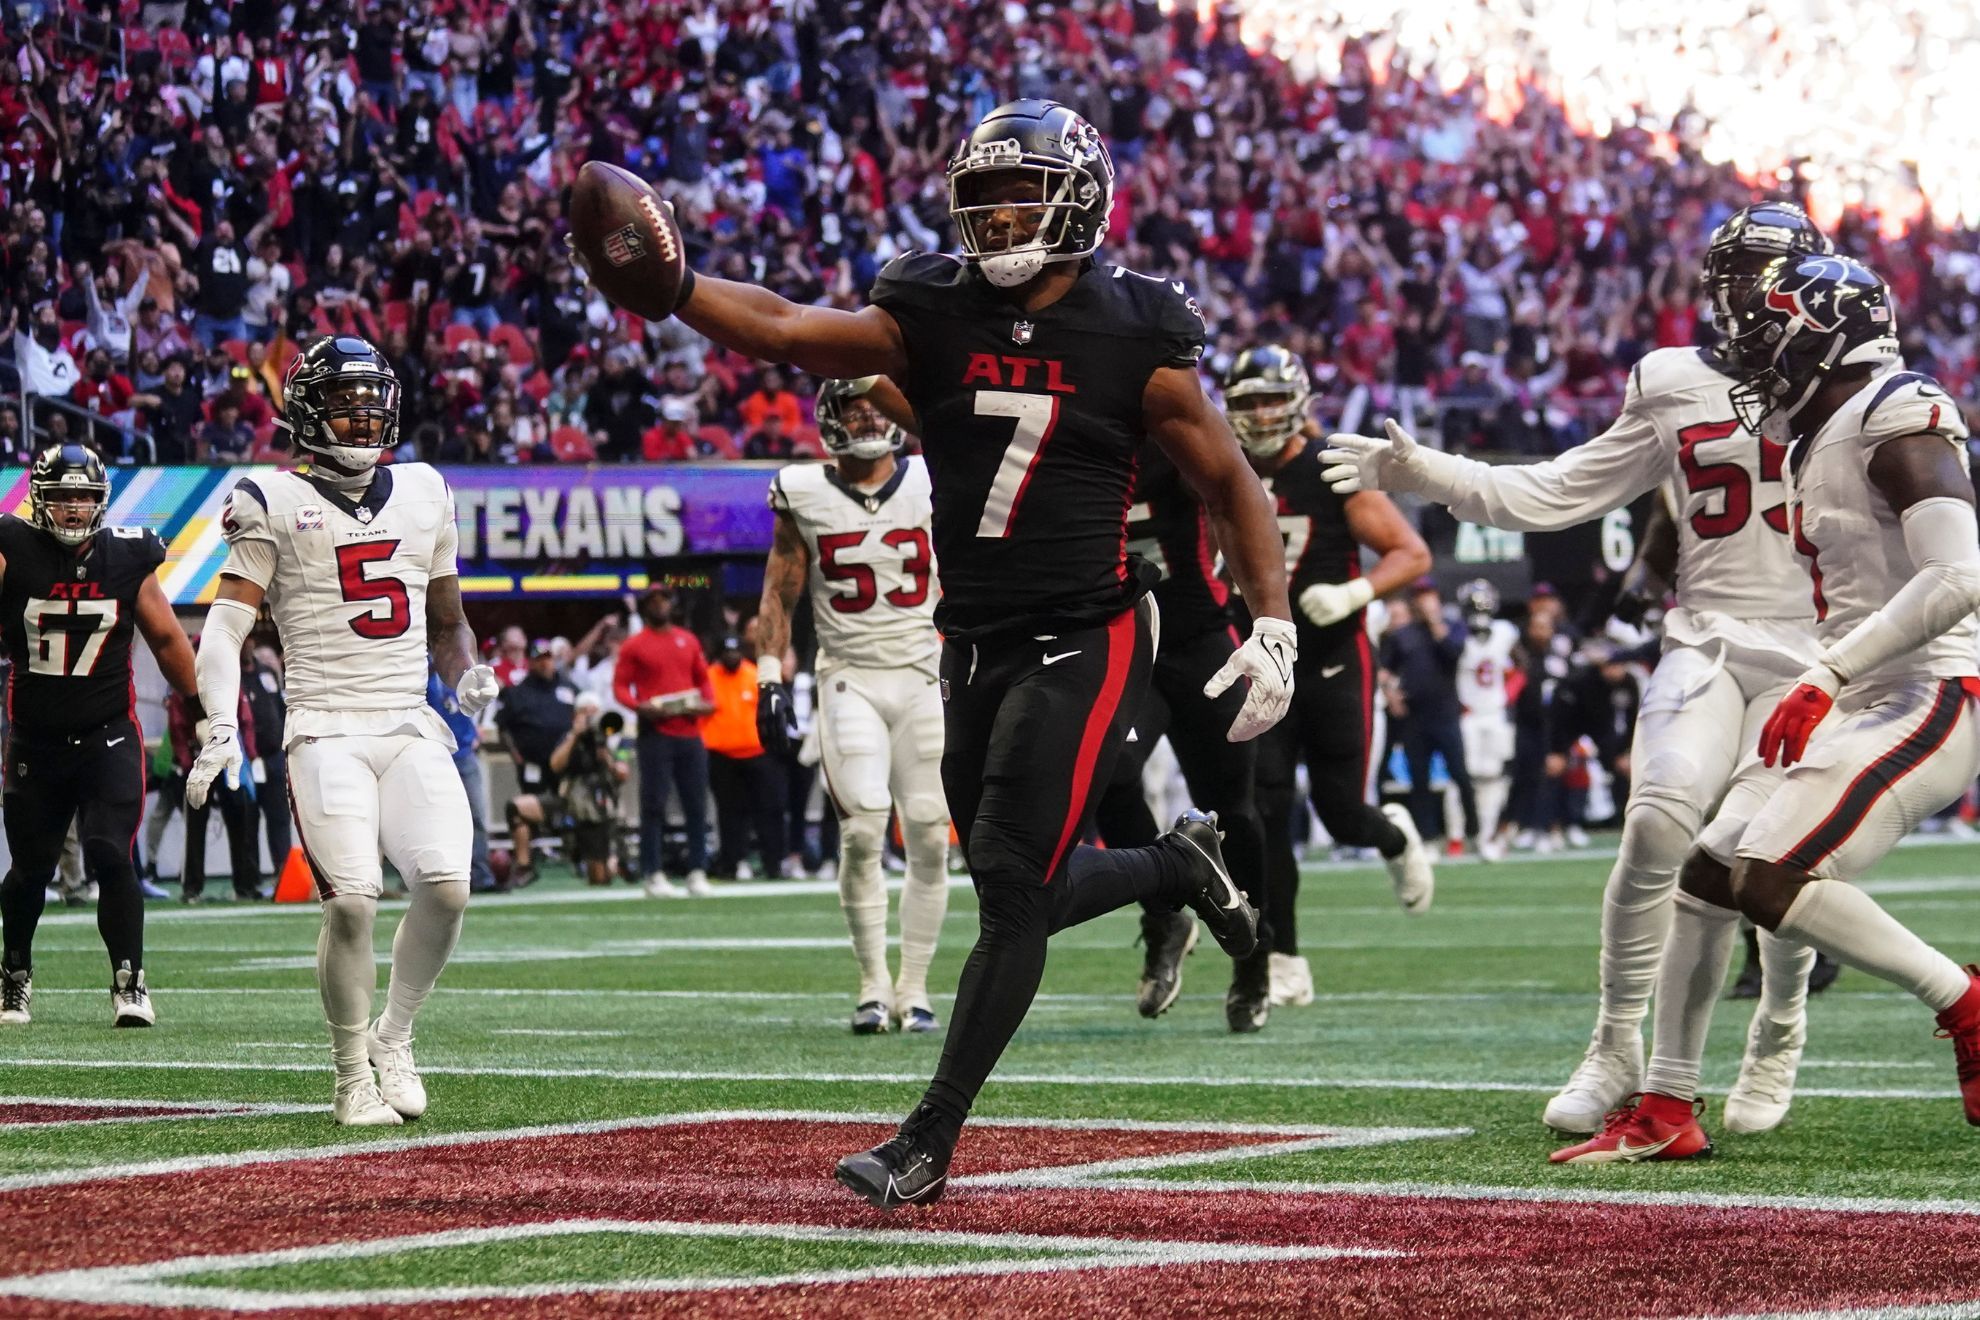 Bijan Robinson scores first NFL career TD as Falcons defeat Texans with walkoff FG